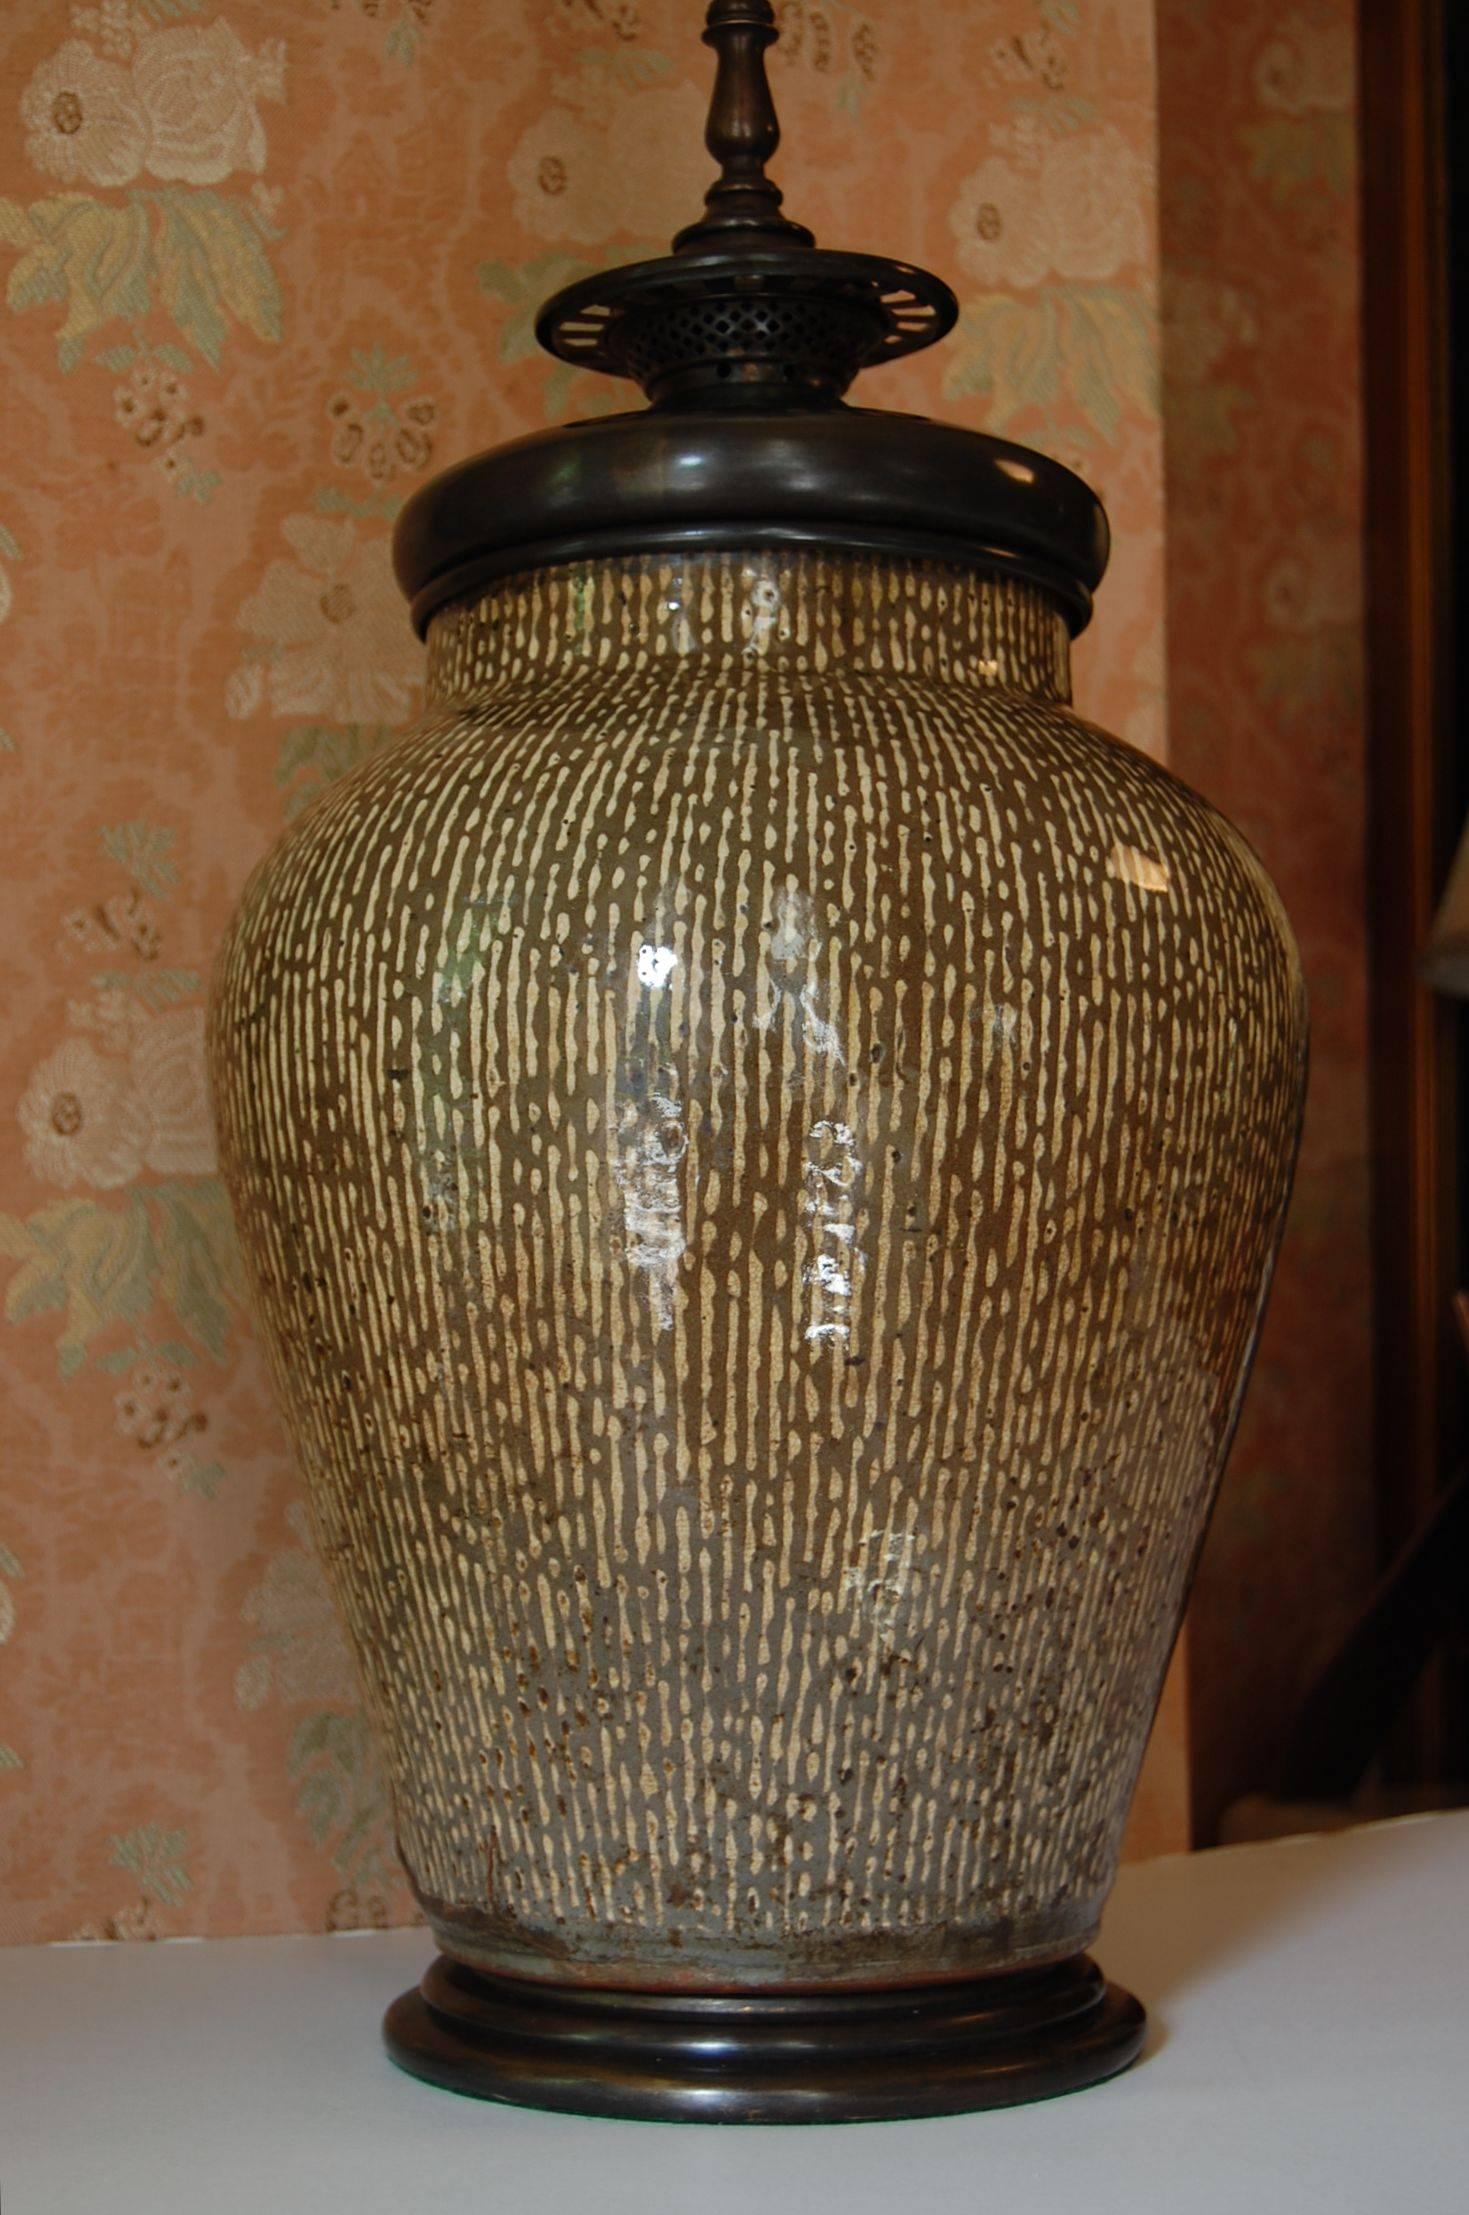 Korean Asian Urn Wired as a Lamp with Bronze Base and Mounts, circa 1900